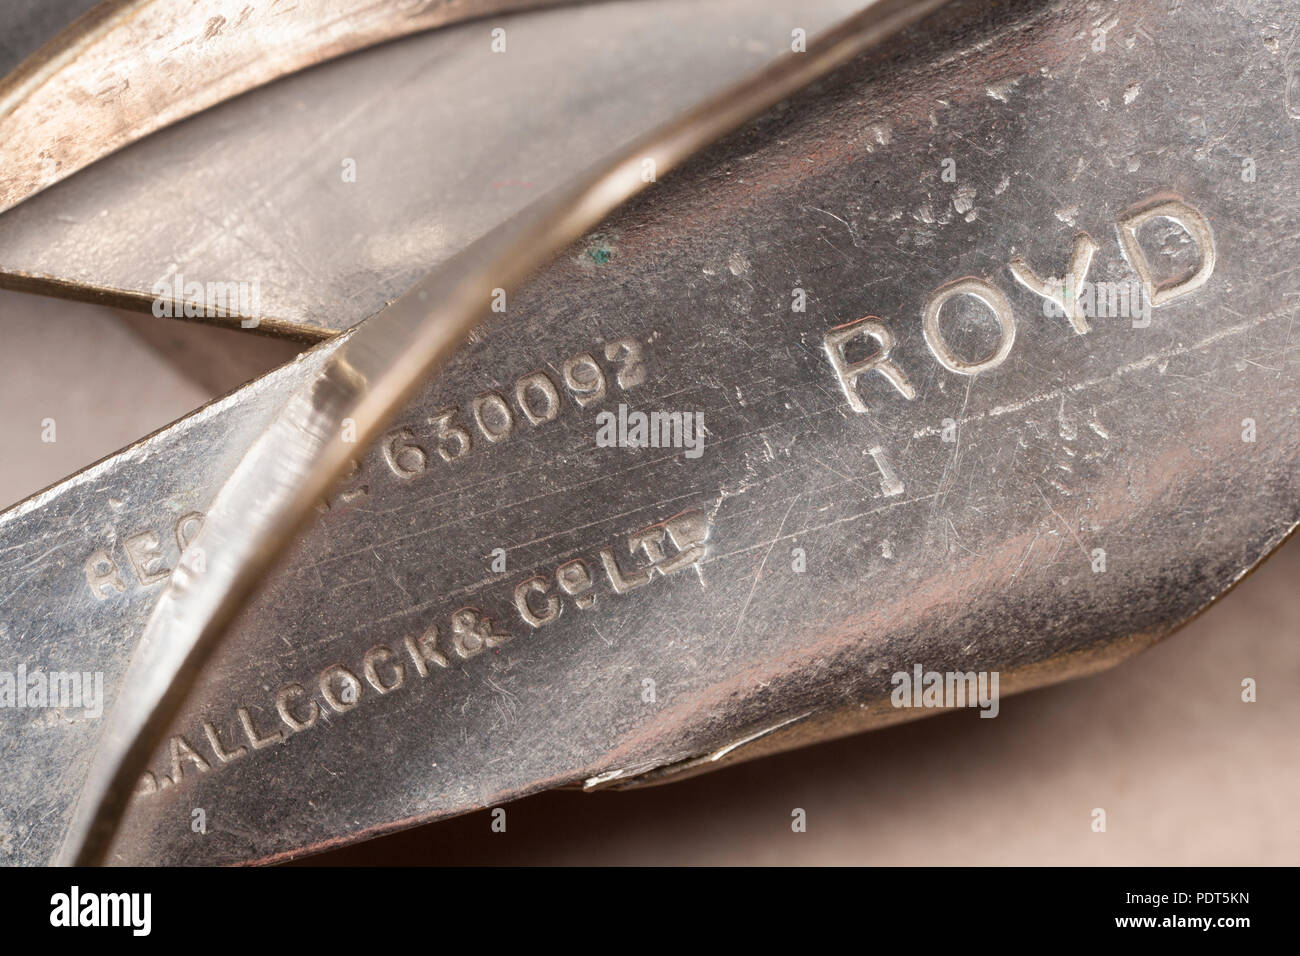 Detail of a metal ROYD fishing lure made by Allcocks & Co Ltd. From a collection of vintage fishing tackle Dorset England UK GB Stock Photo